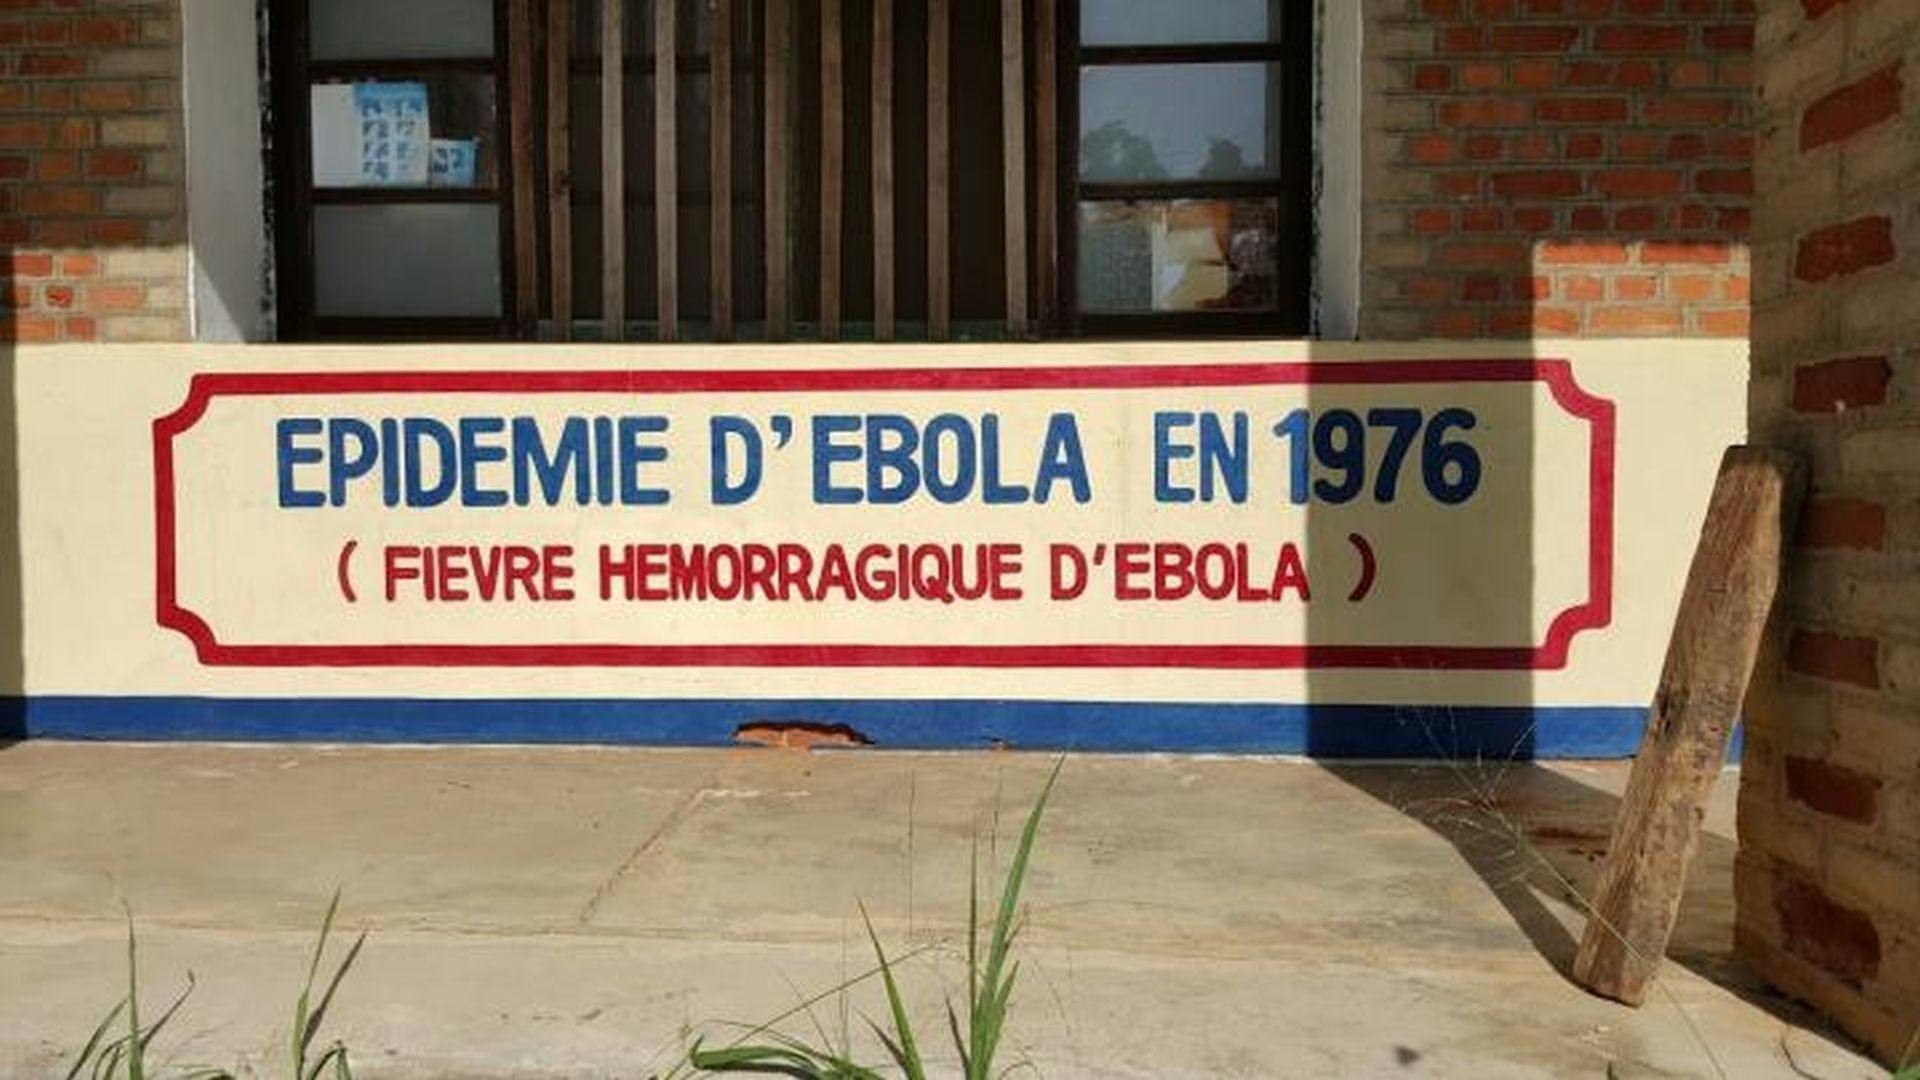 40 Years After First Ebola Outbreak, Survivors Show Signs They Can Stave Off New Infection